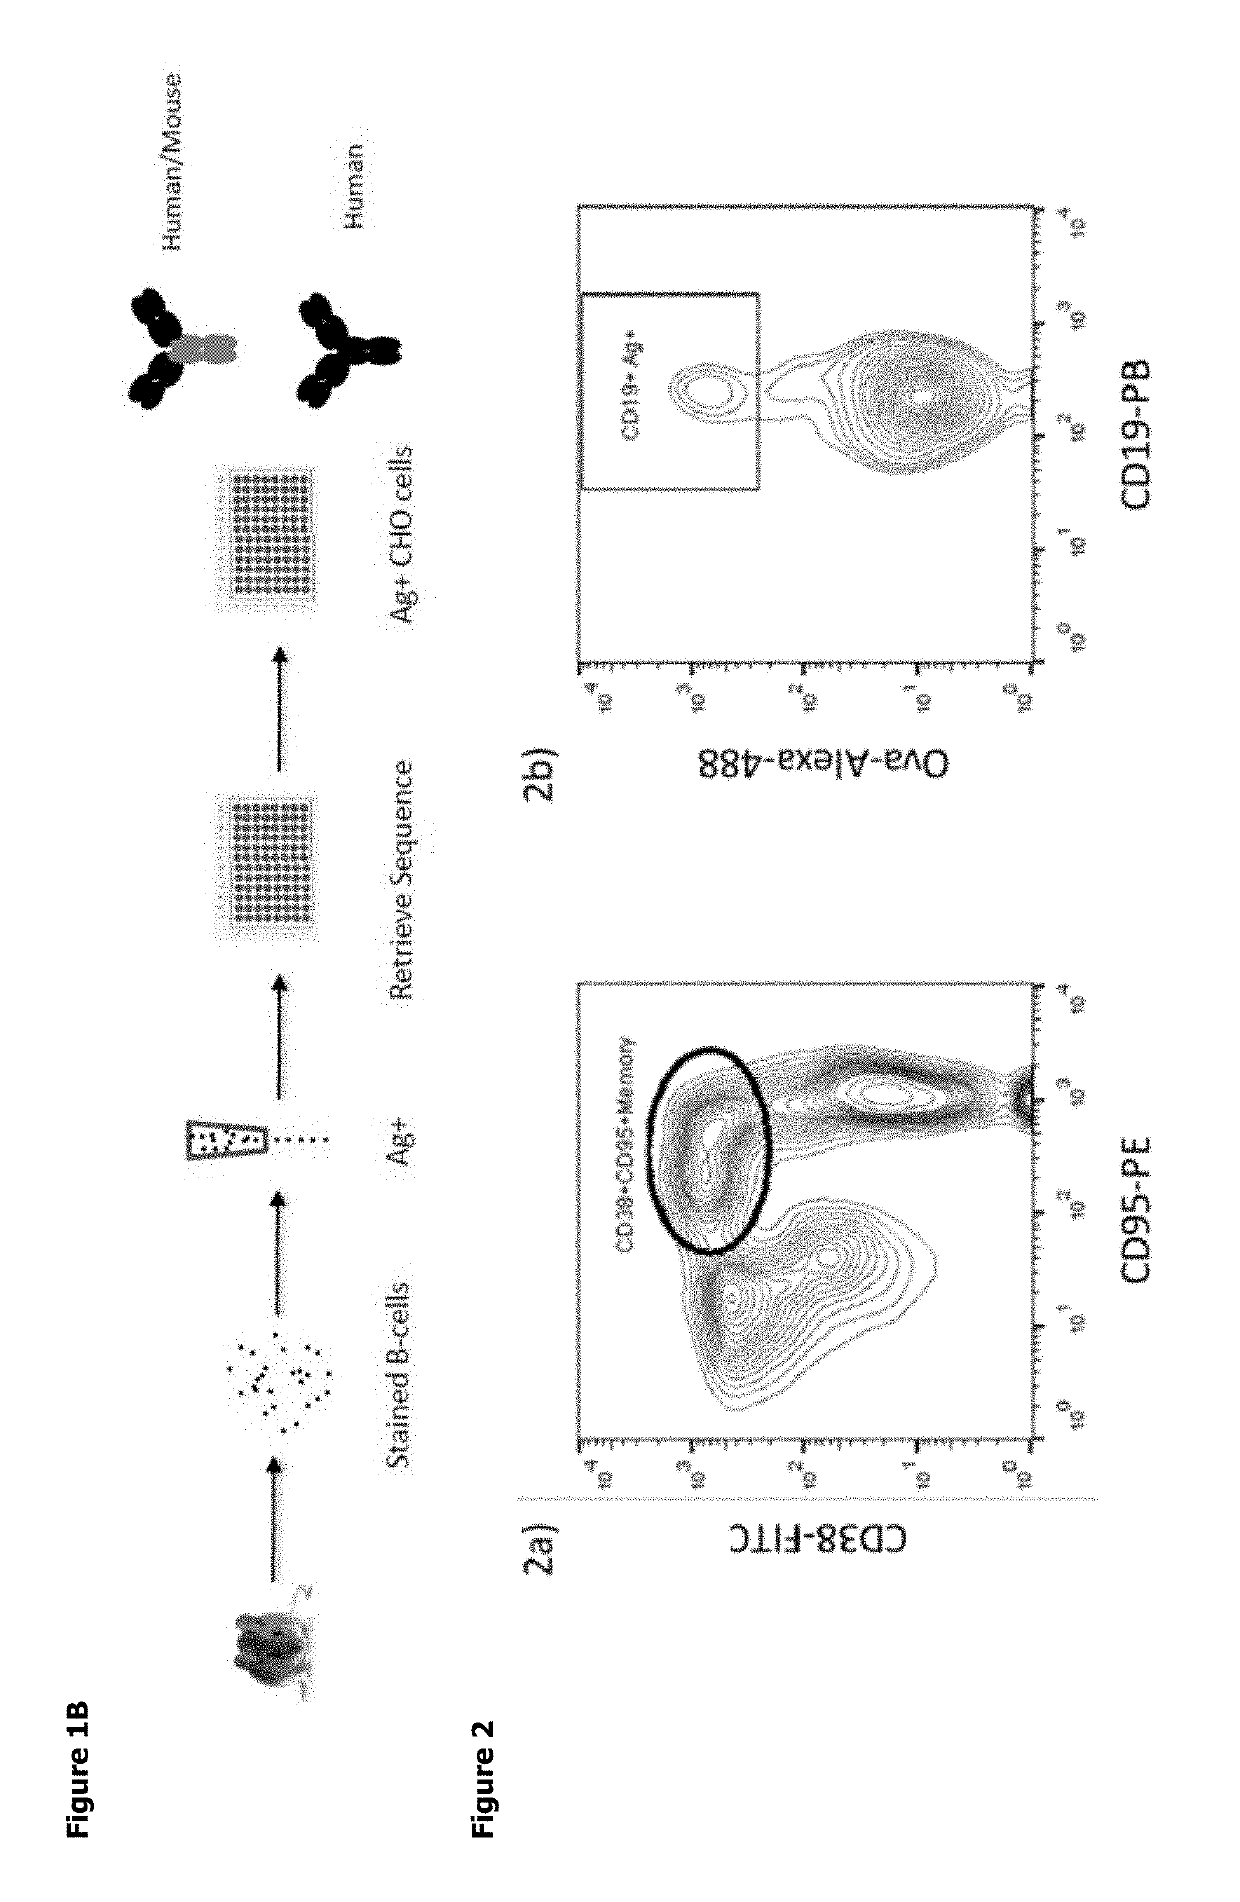 Expression vector production and high-throughput cell screening